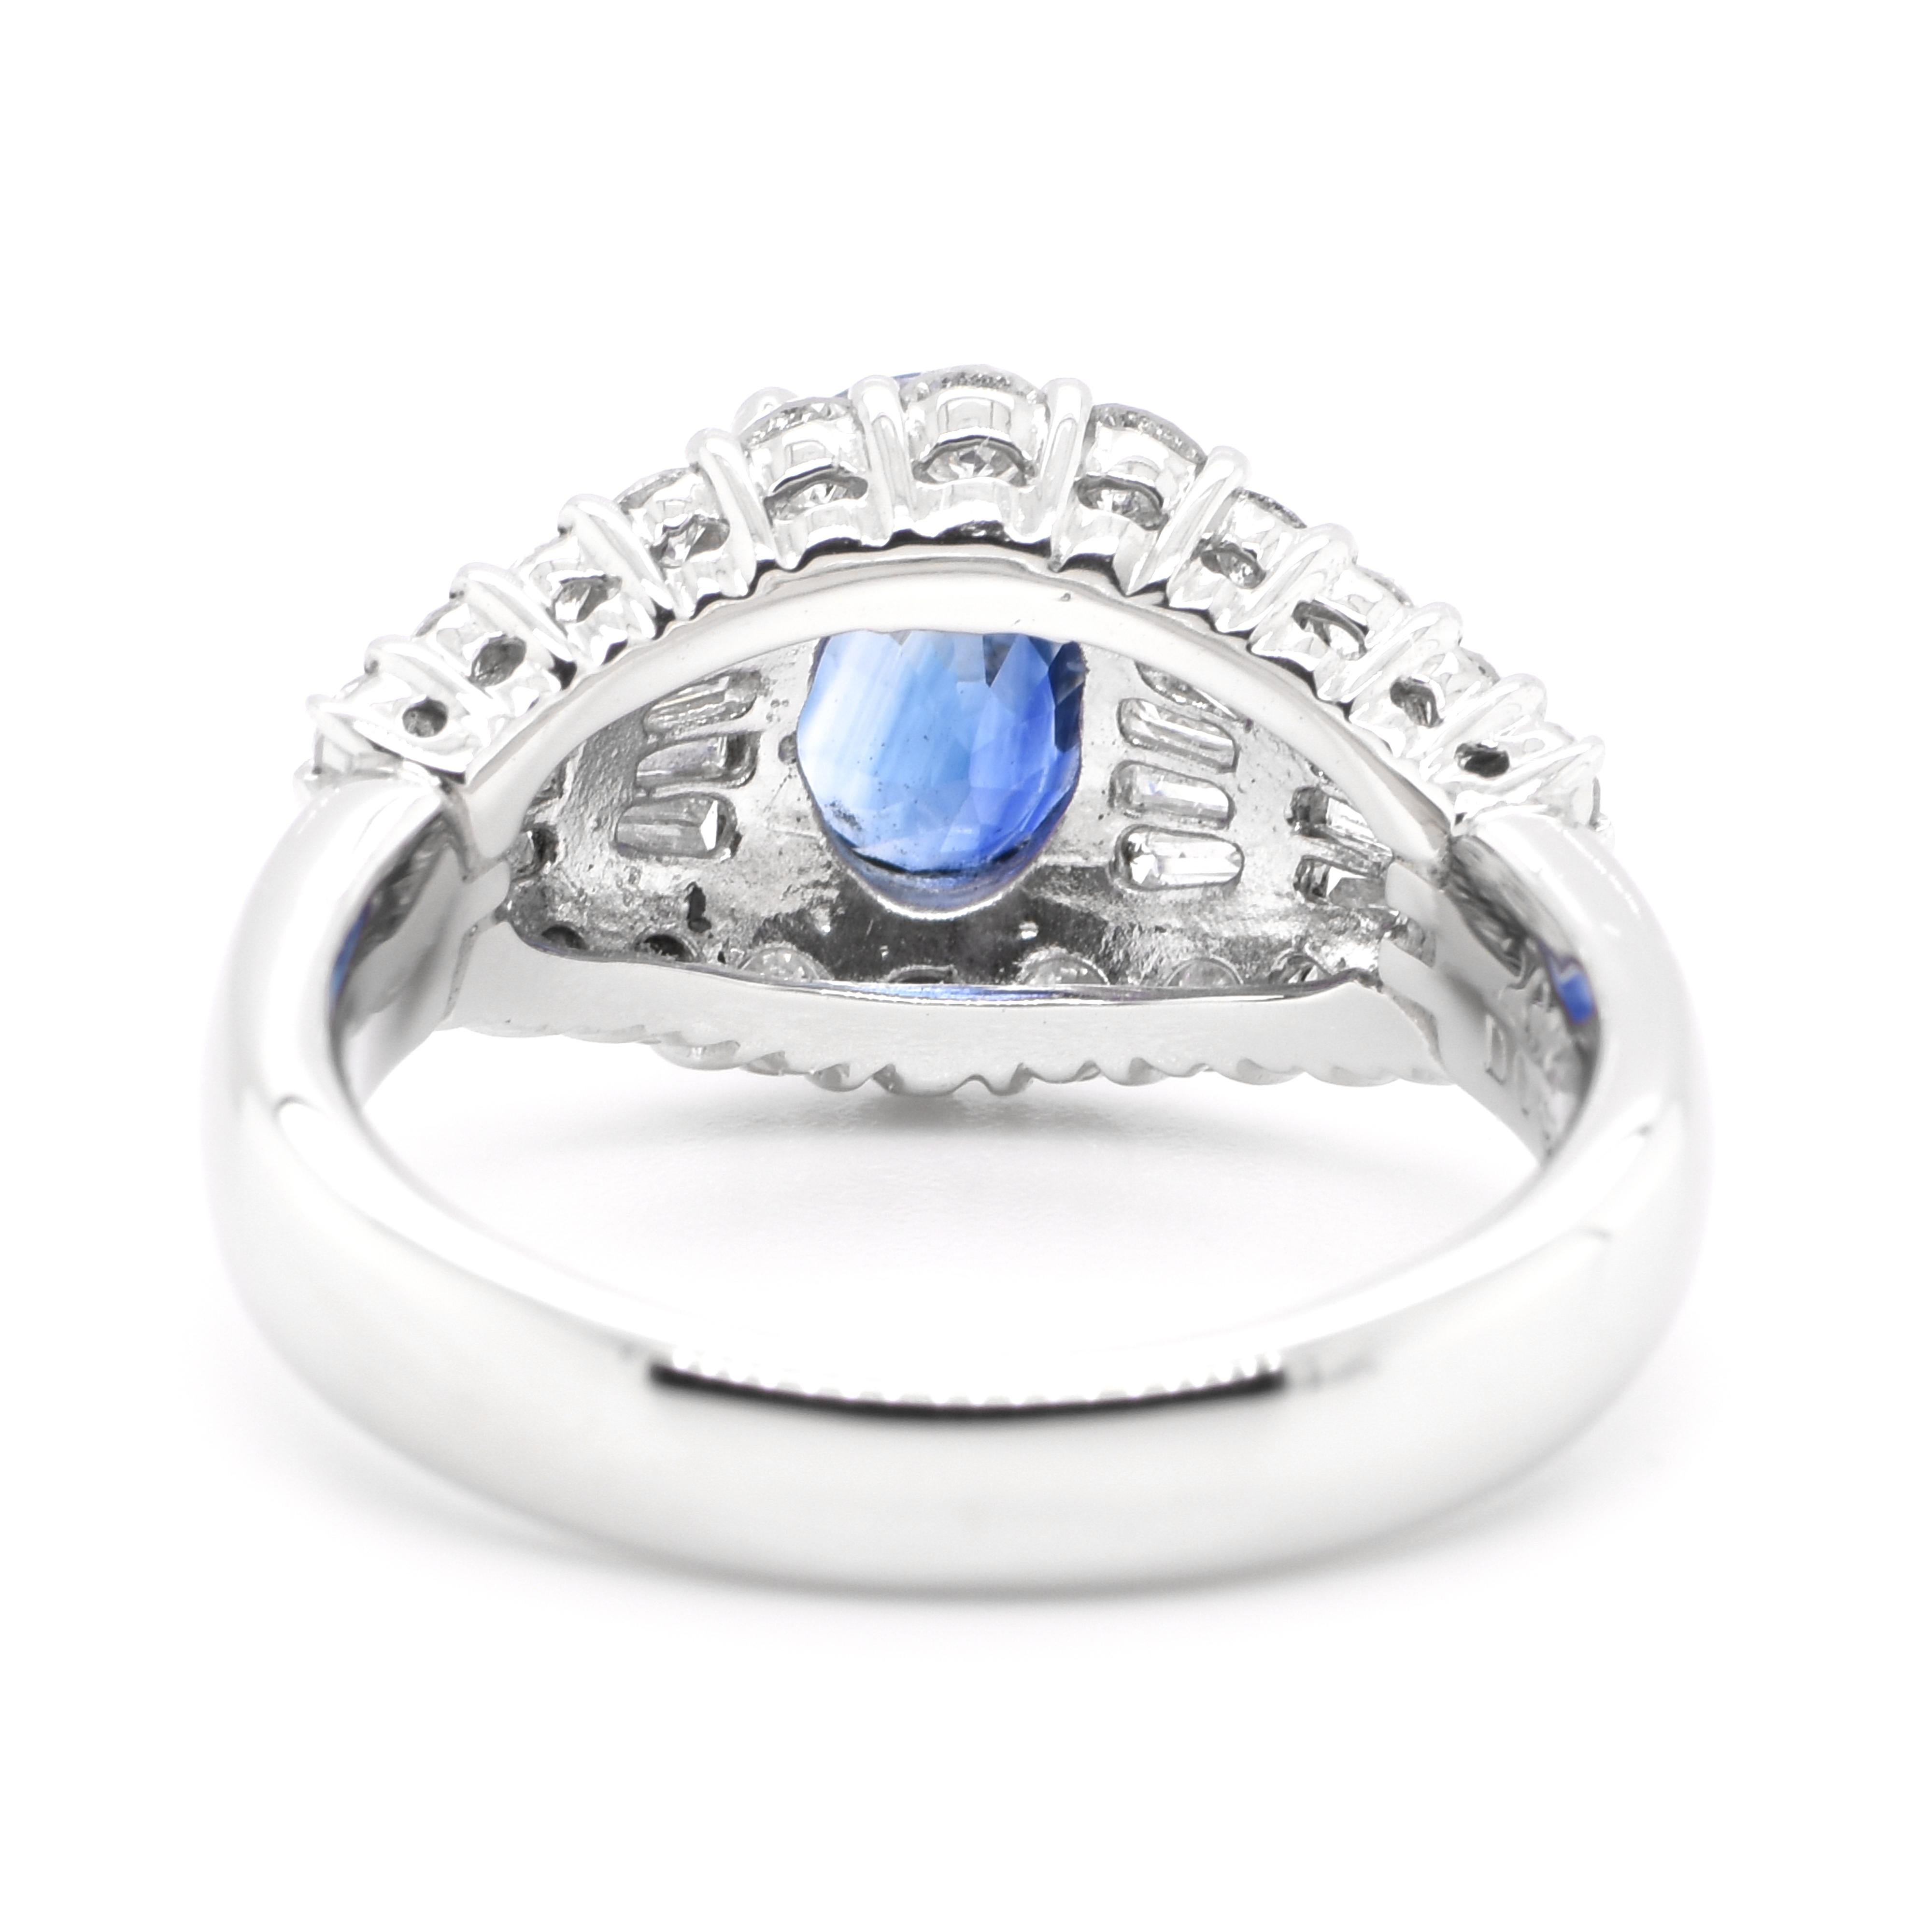 2.02 Carat Natural Sapphire and Diamond Art Deco Style Ring Set in Platinum 1